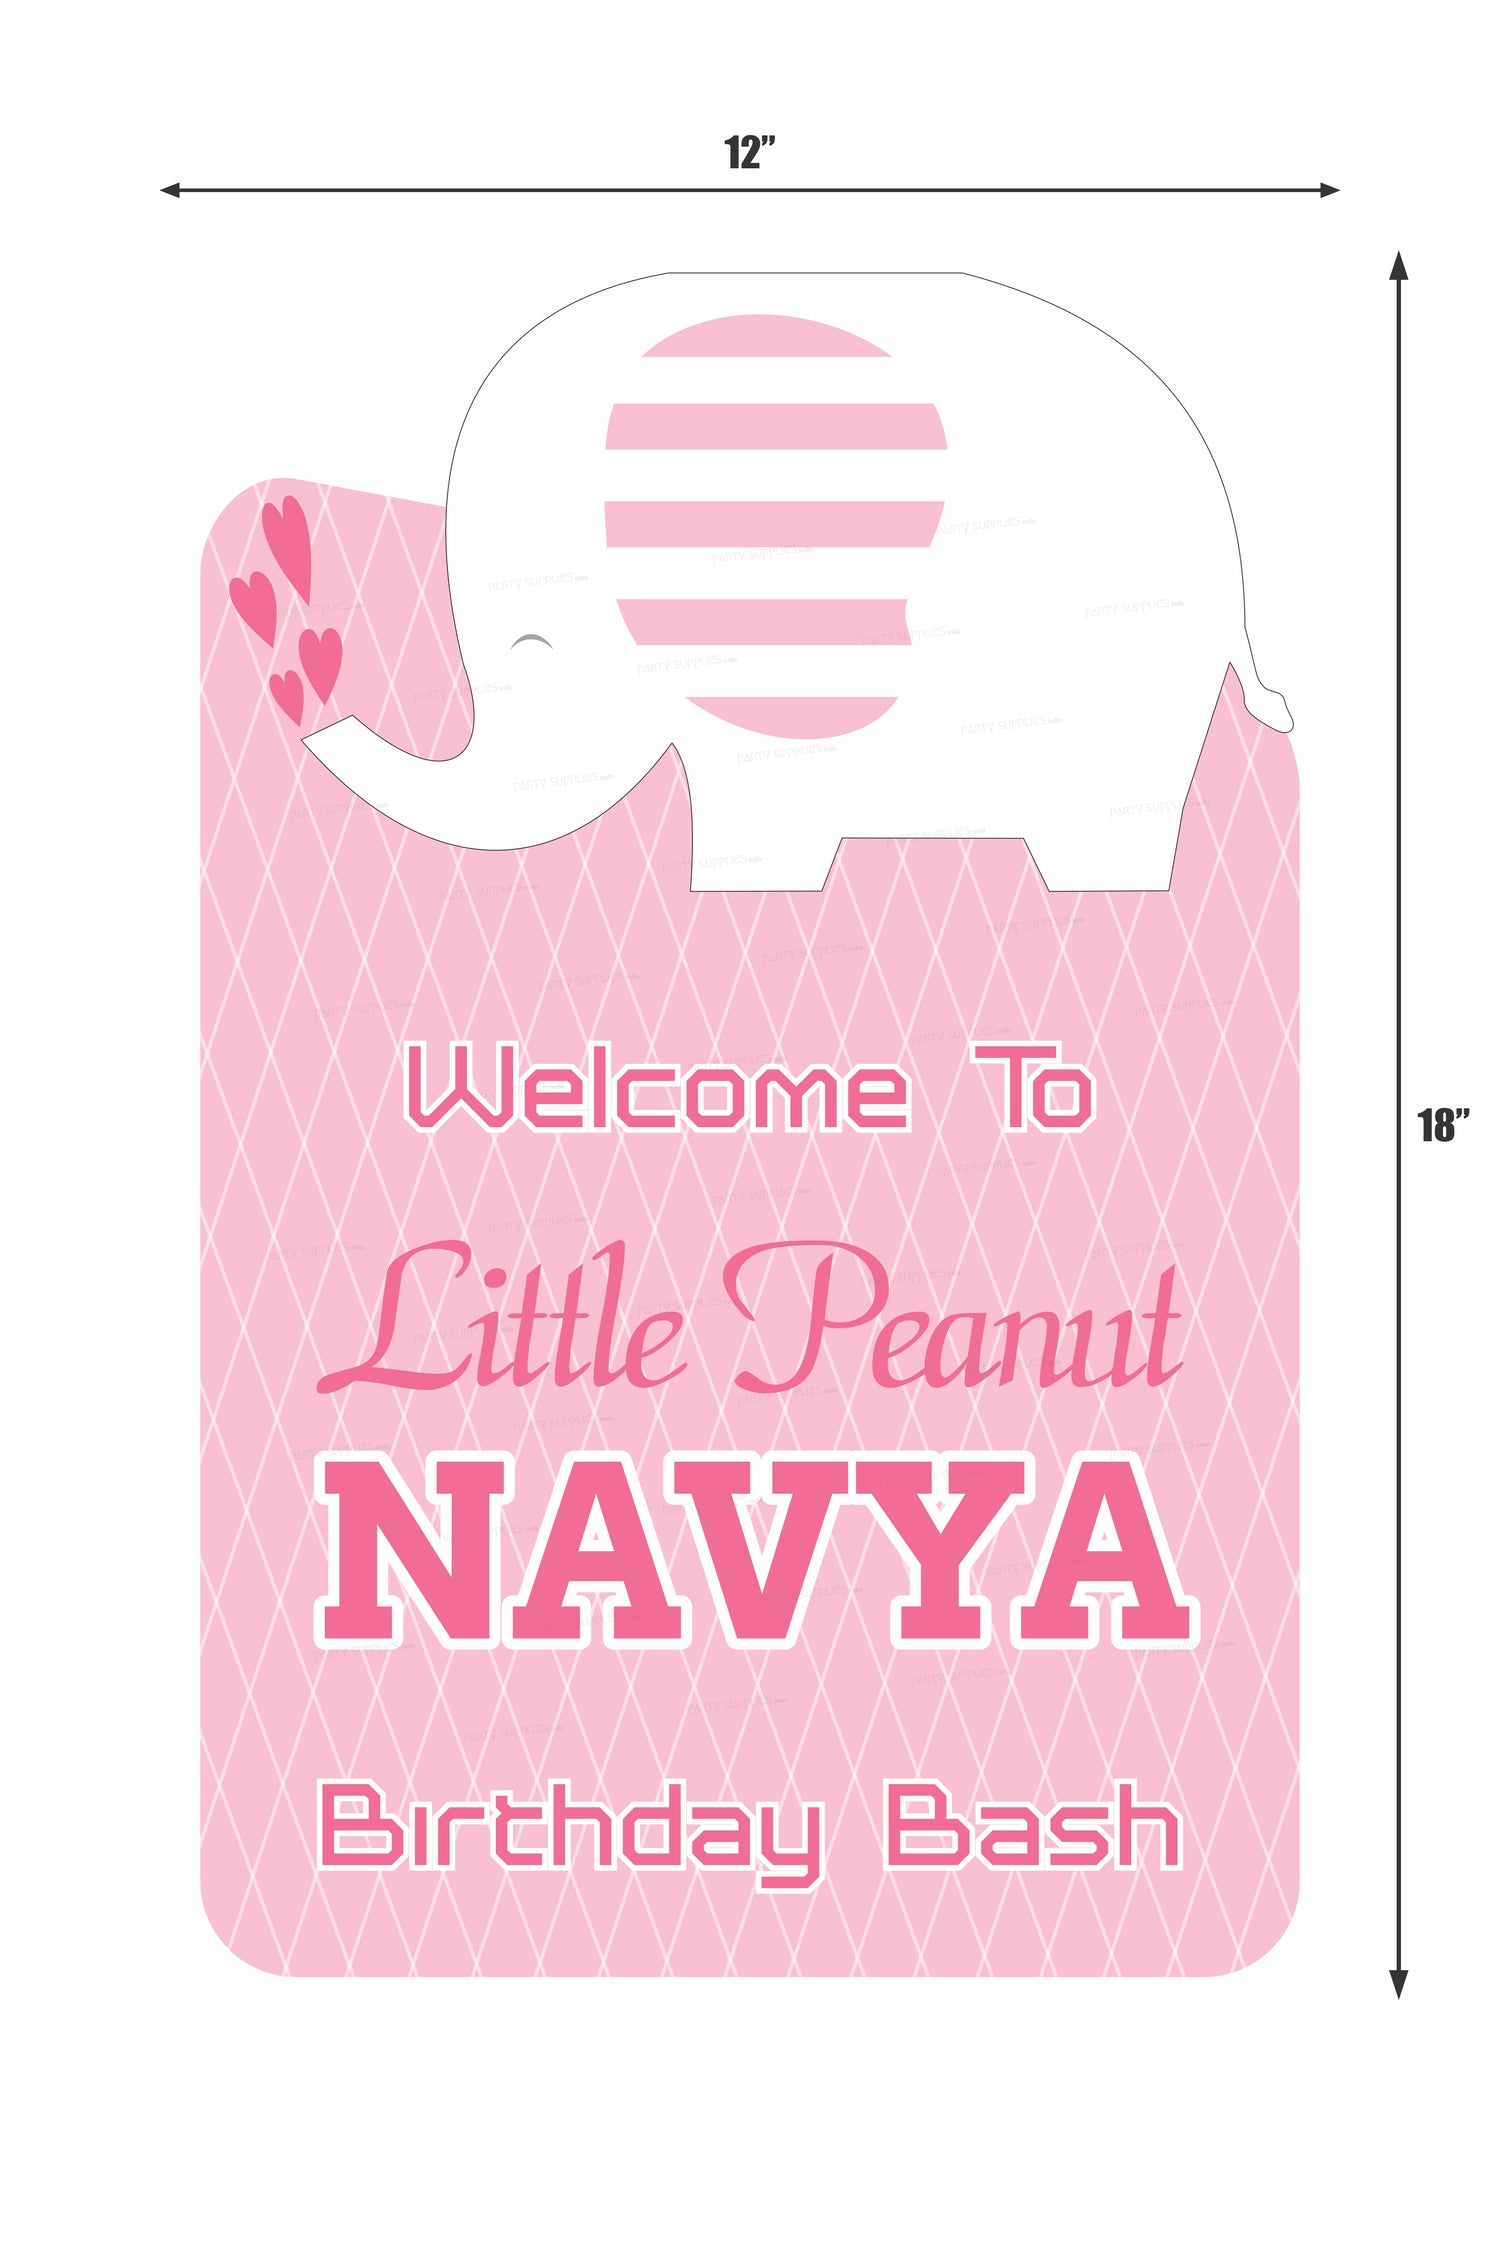 PSI Pink Elephant Theme Customized Welcome Board